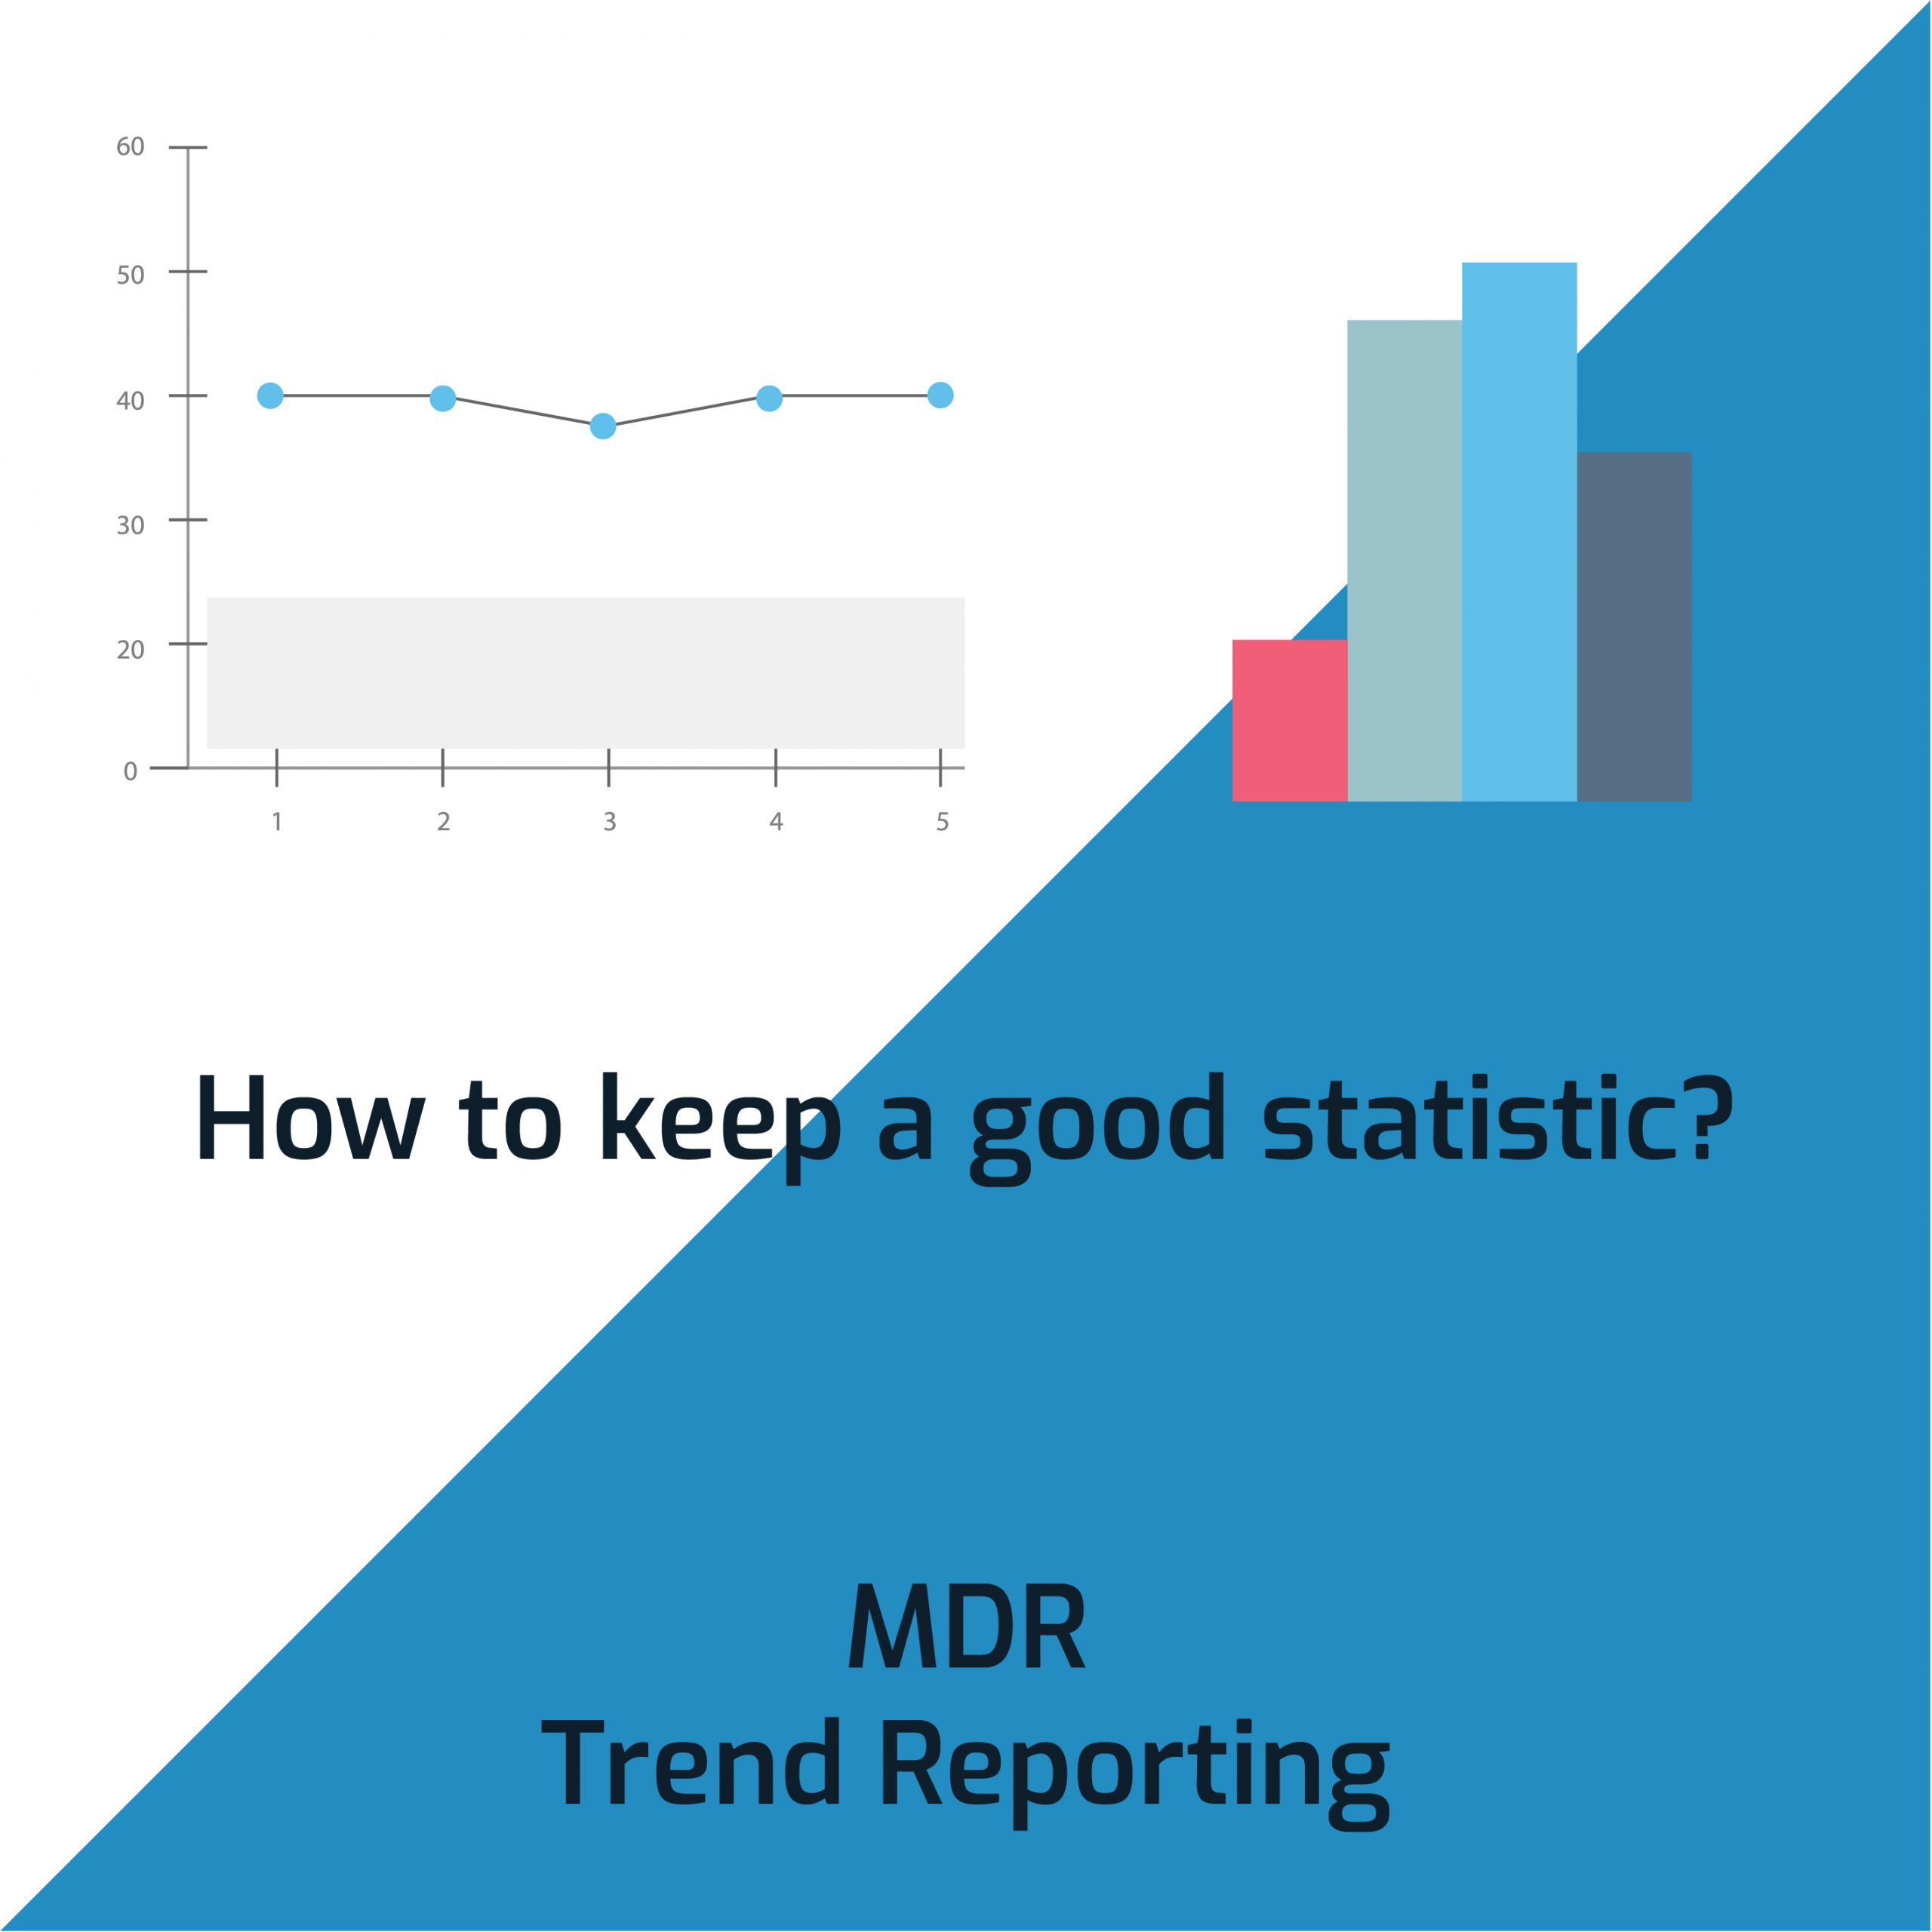 MDR Trend Reporting